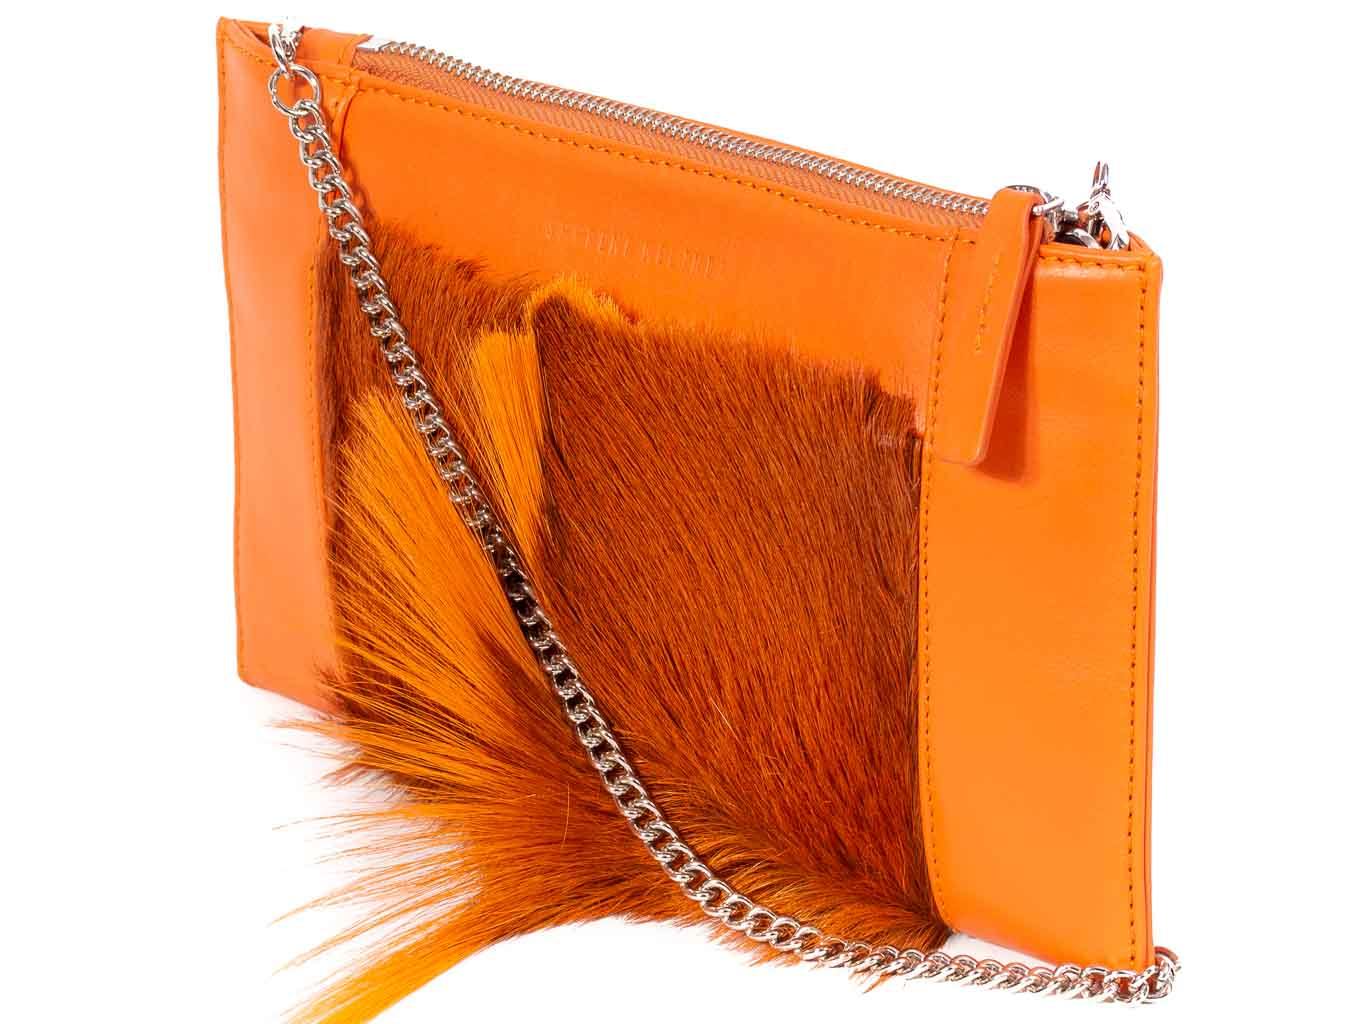 Clutch Springbok Handbag in Orange with a fan feature by Sherene Melinda side angle strap